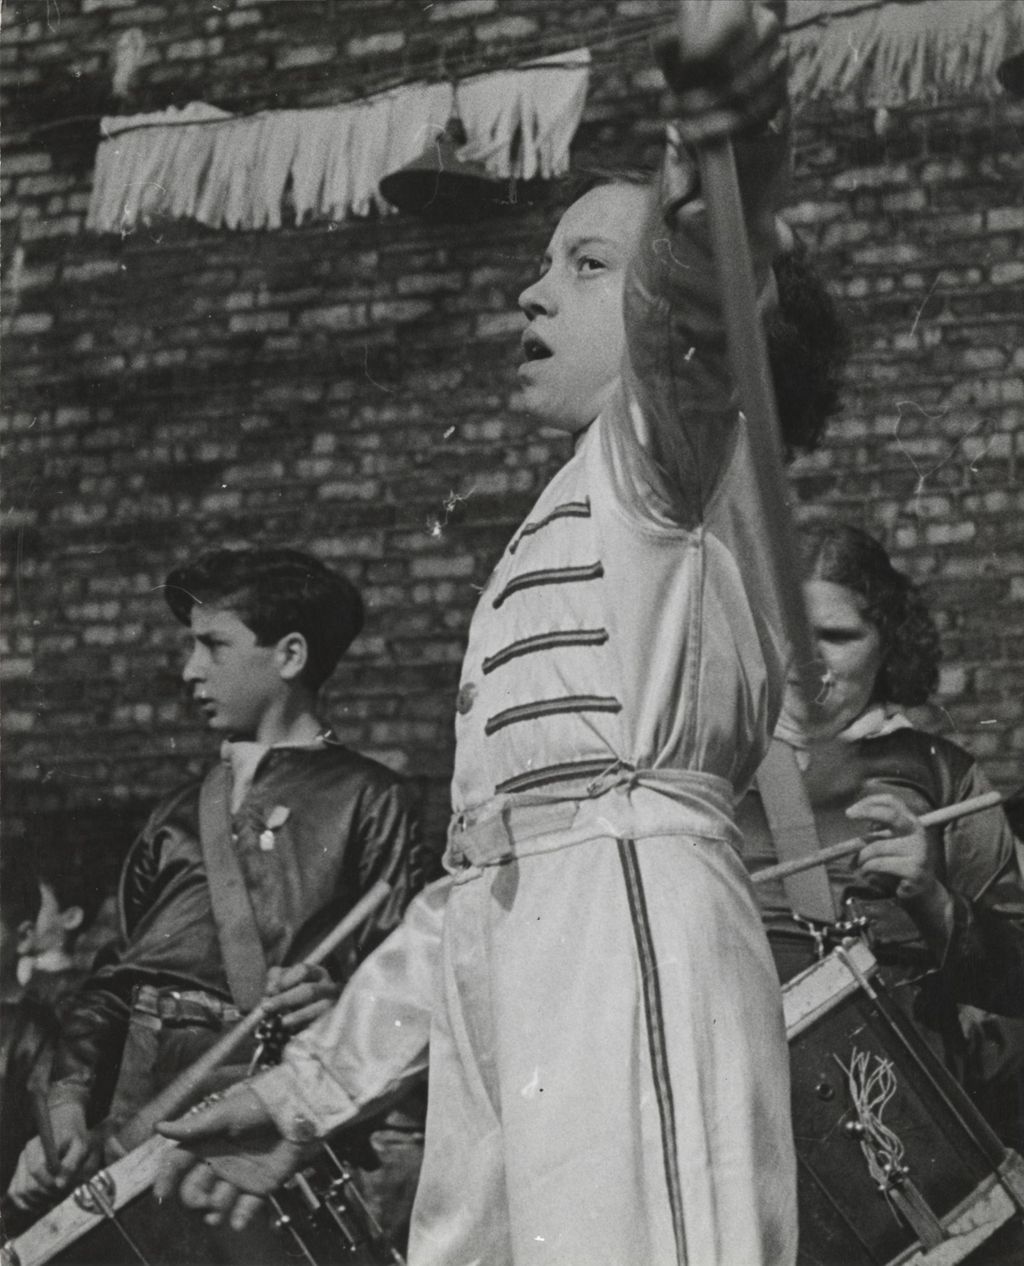 Drum major and two drummers performing on stage in the Mary Crane Nursery courtyard as part of Hull-House 50th Anniversary circus show